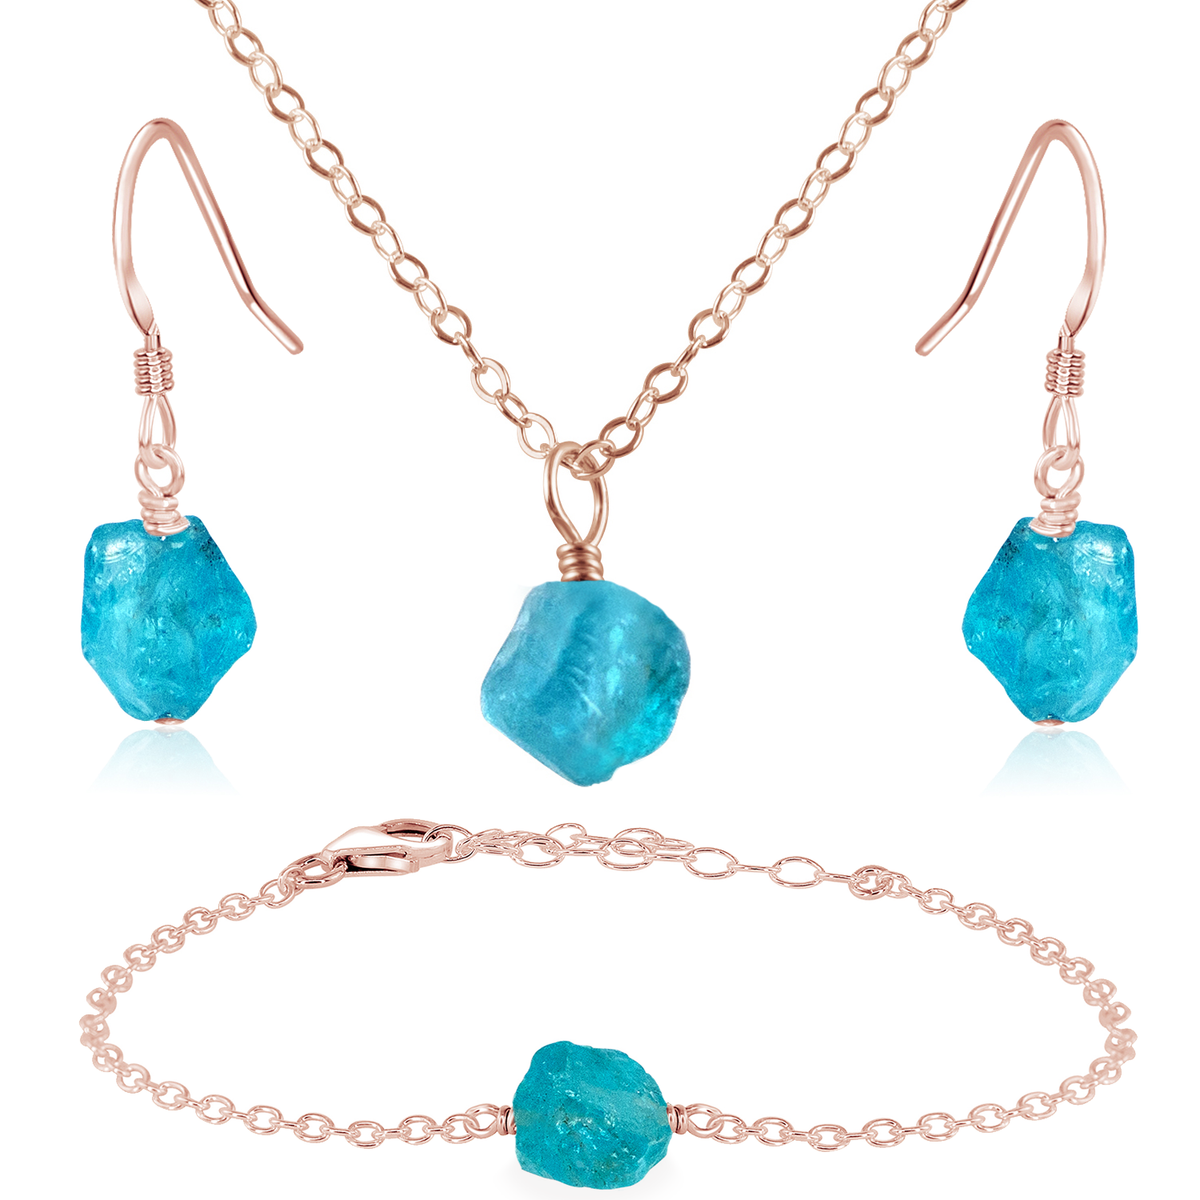 Raw Apatite Crystal Earrings & Necklace Set - Raw Apatite Crystal Earrings & Necklace Set - 14k Rose Gold Fill / Cable / Necklace & Earrings & Bracelet - Luna Tide Handmade Crystal Jewellery